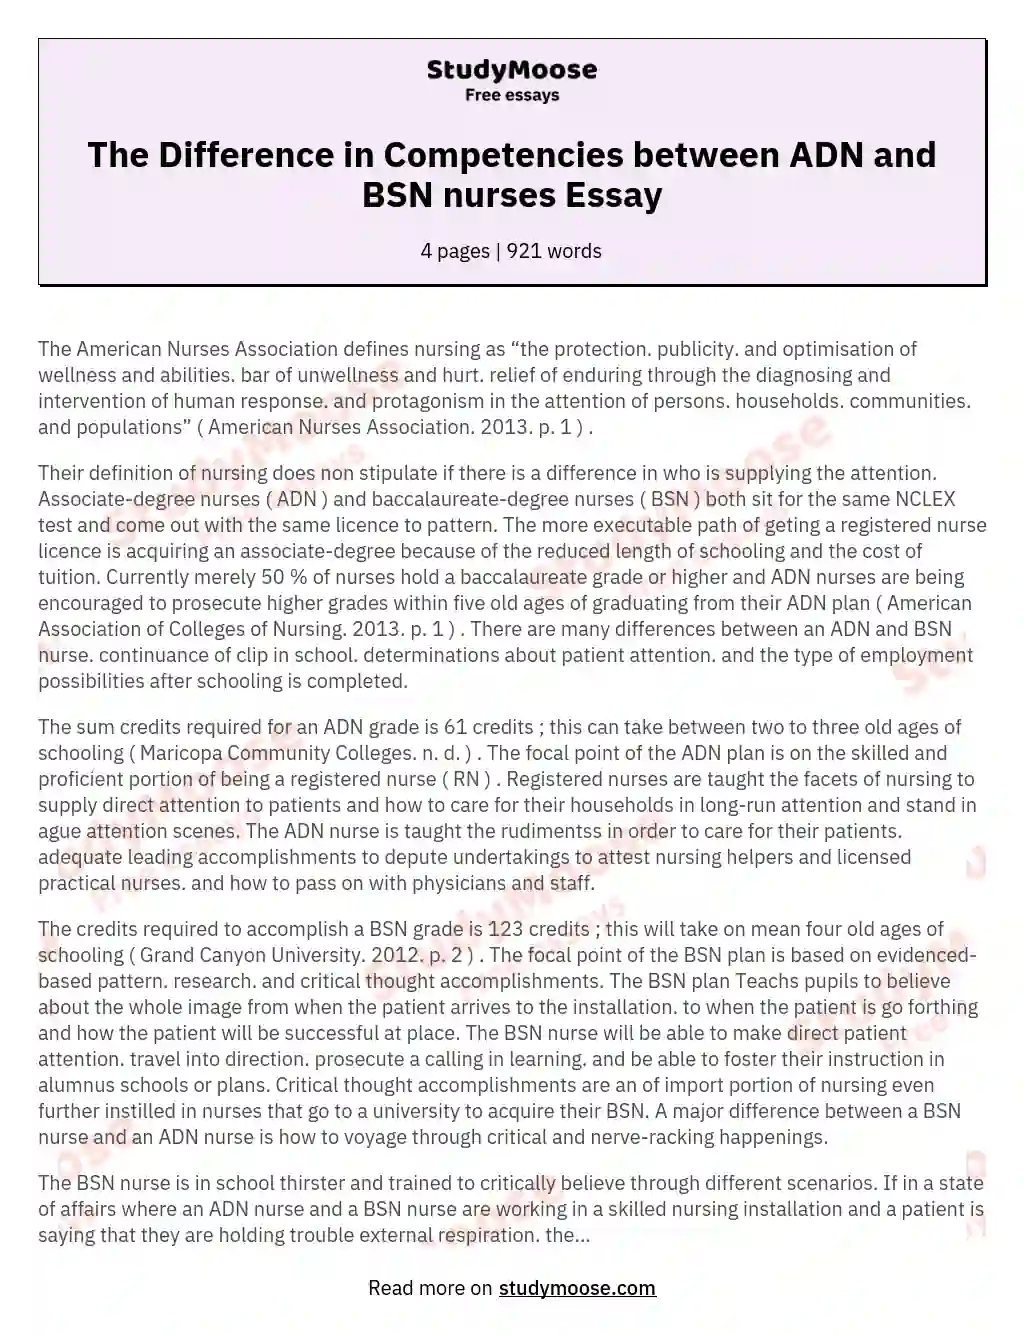 The Difference in Competencies between ADN and BSN nurses Essay essay